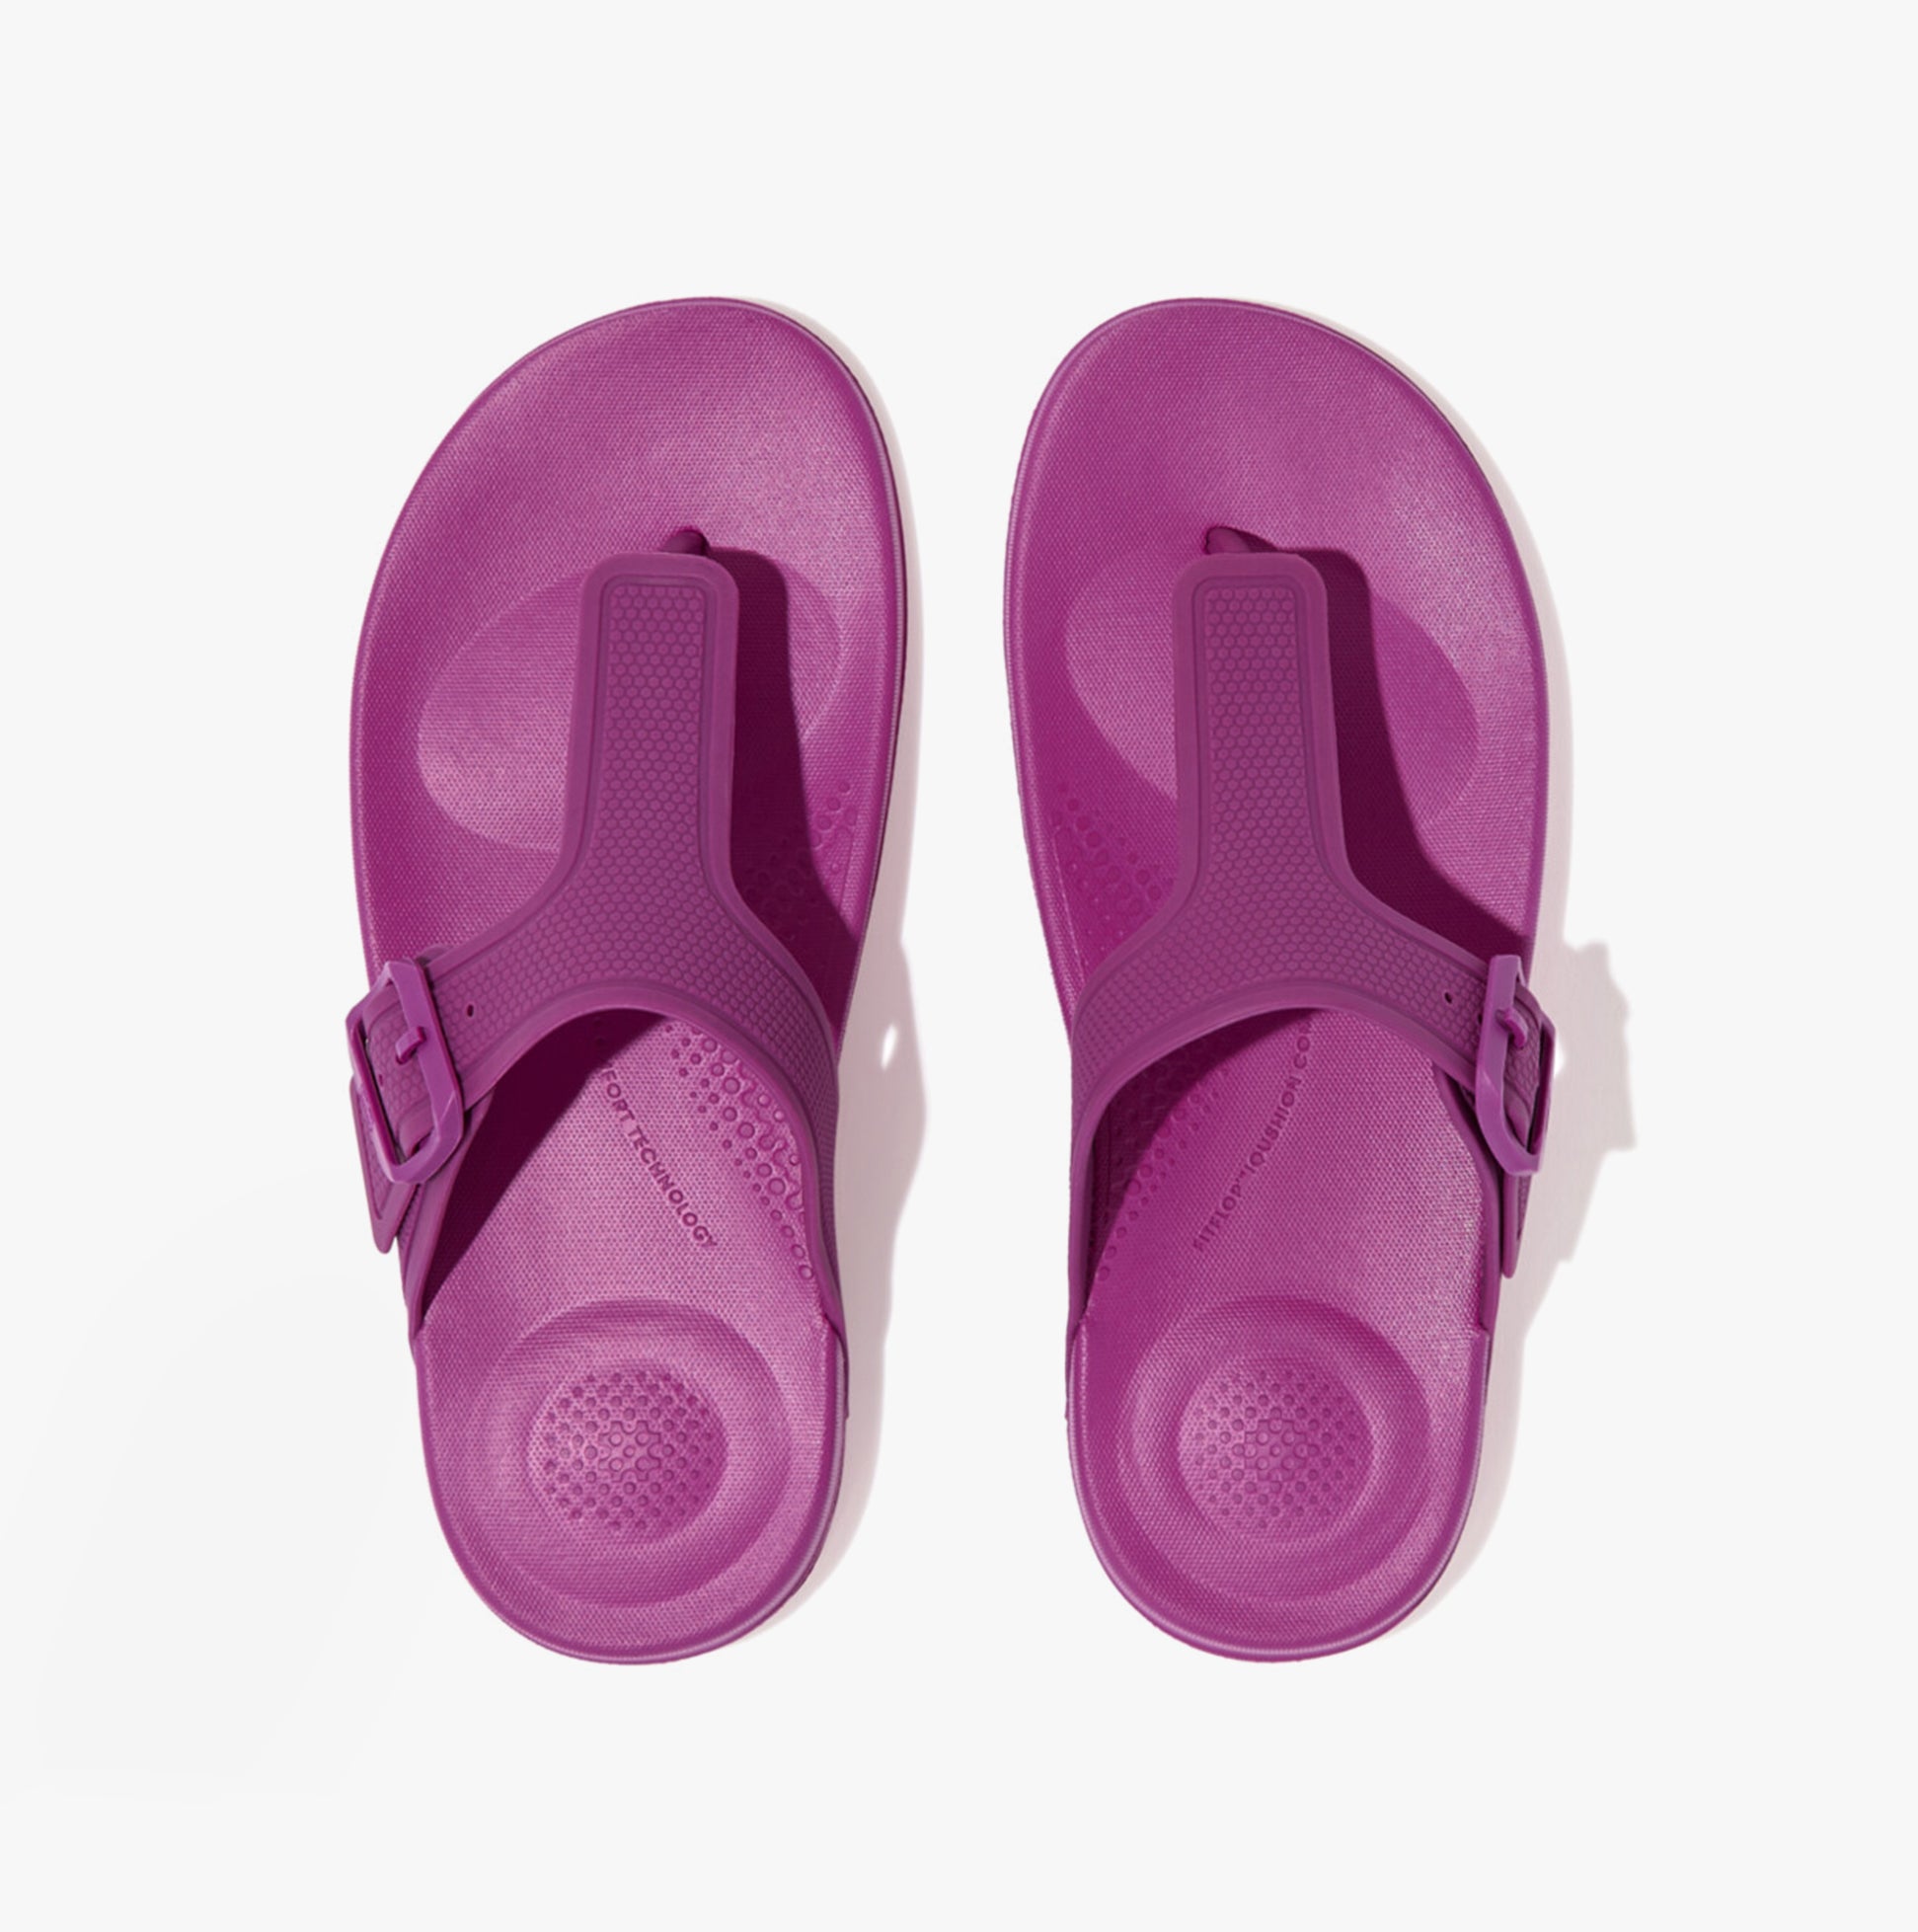 FitFlop-[GB3-A29]-MiamiViolet-3.jpg